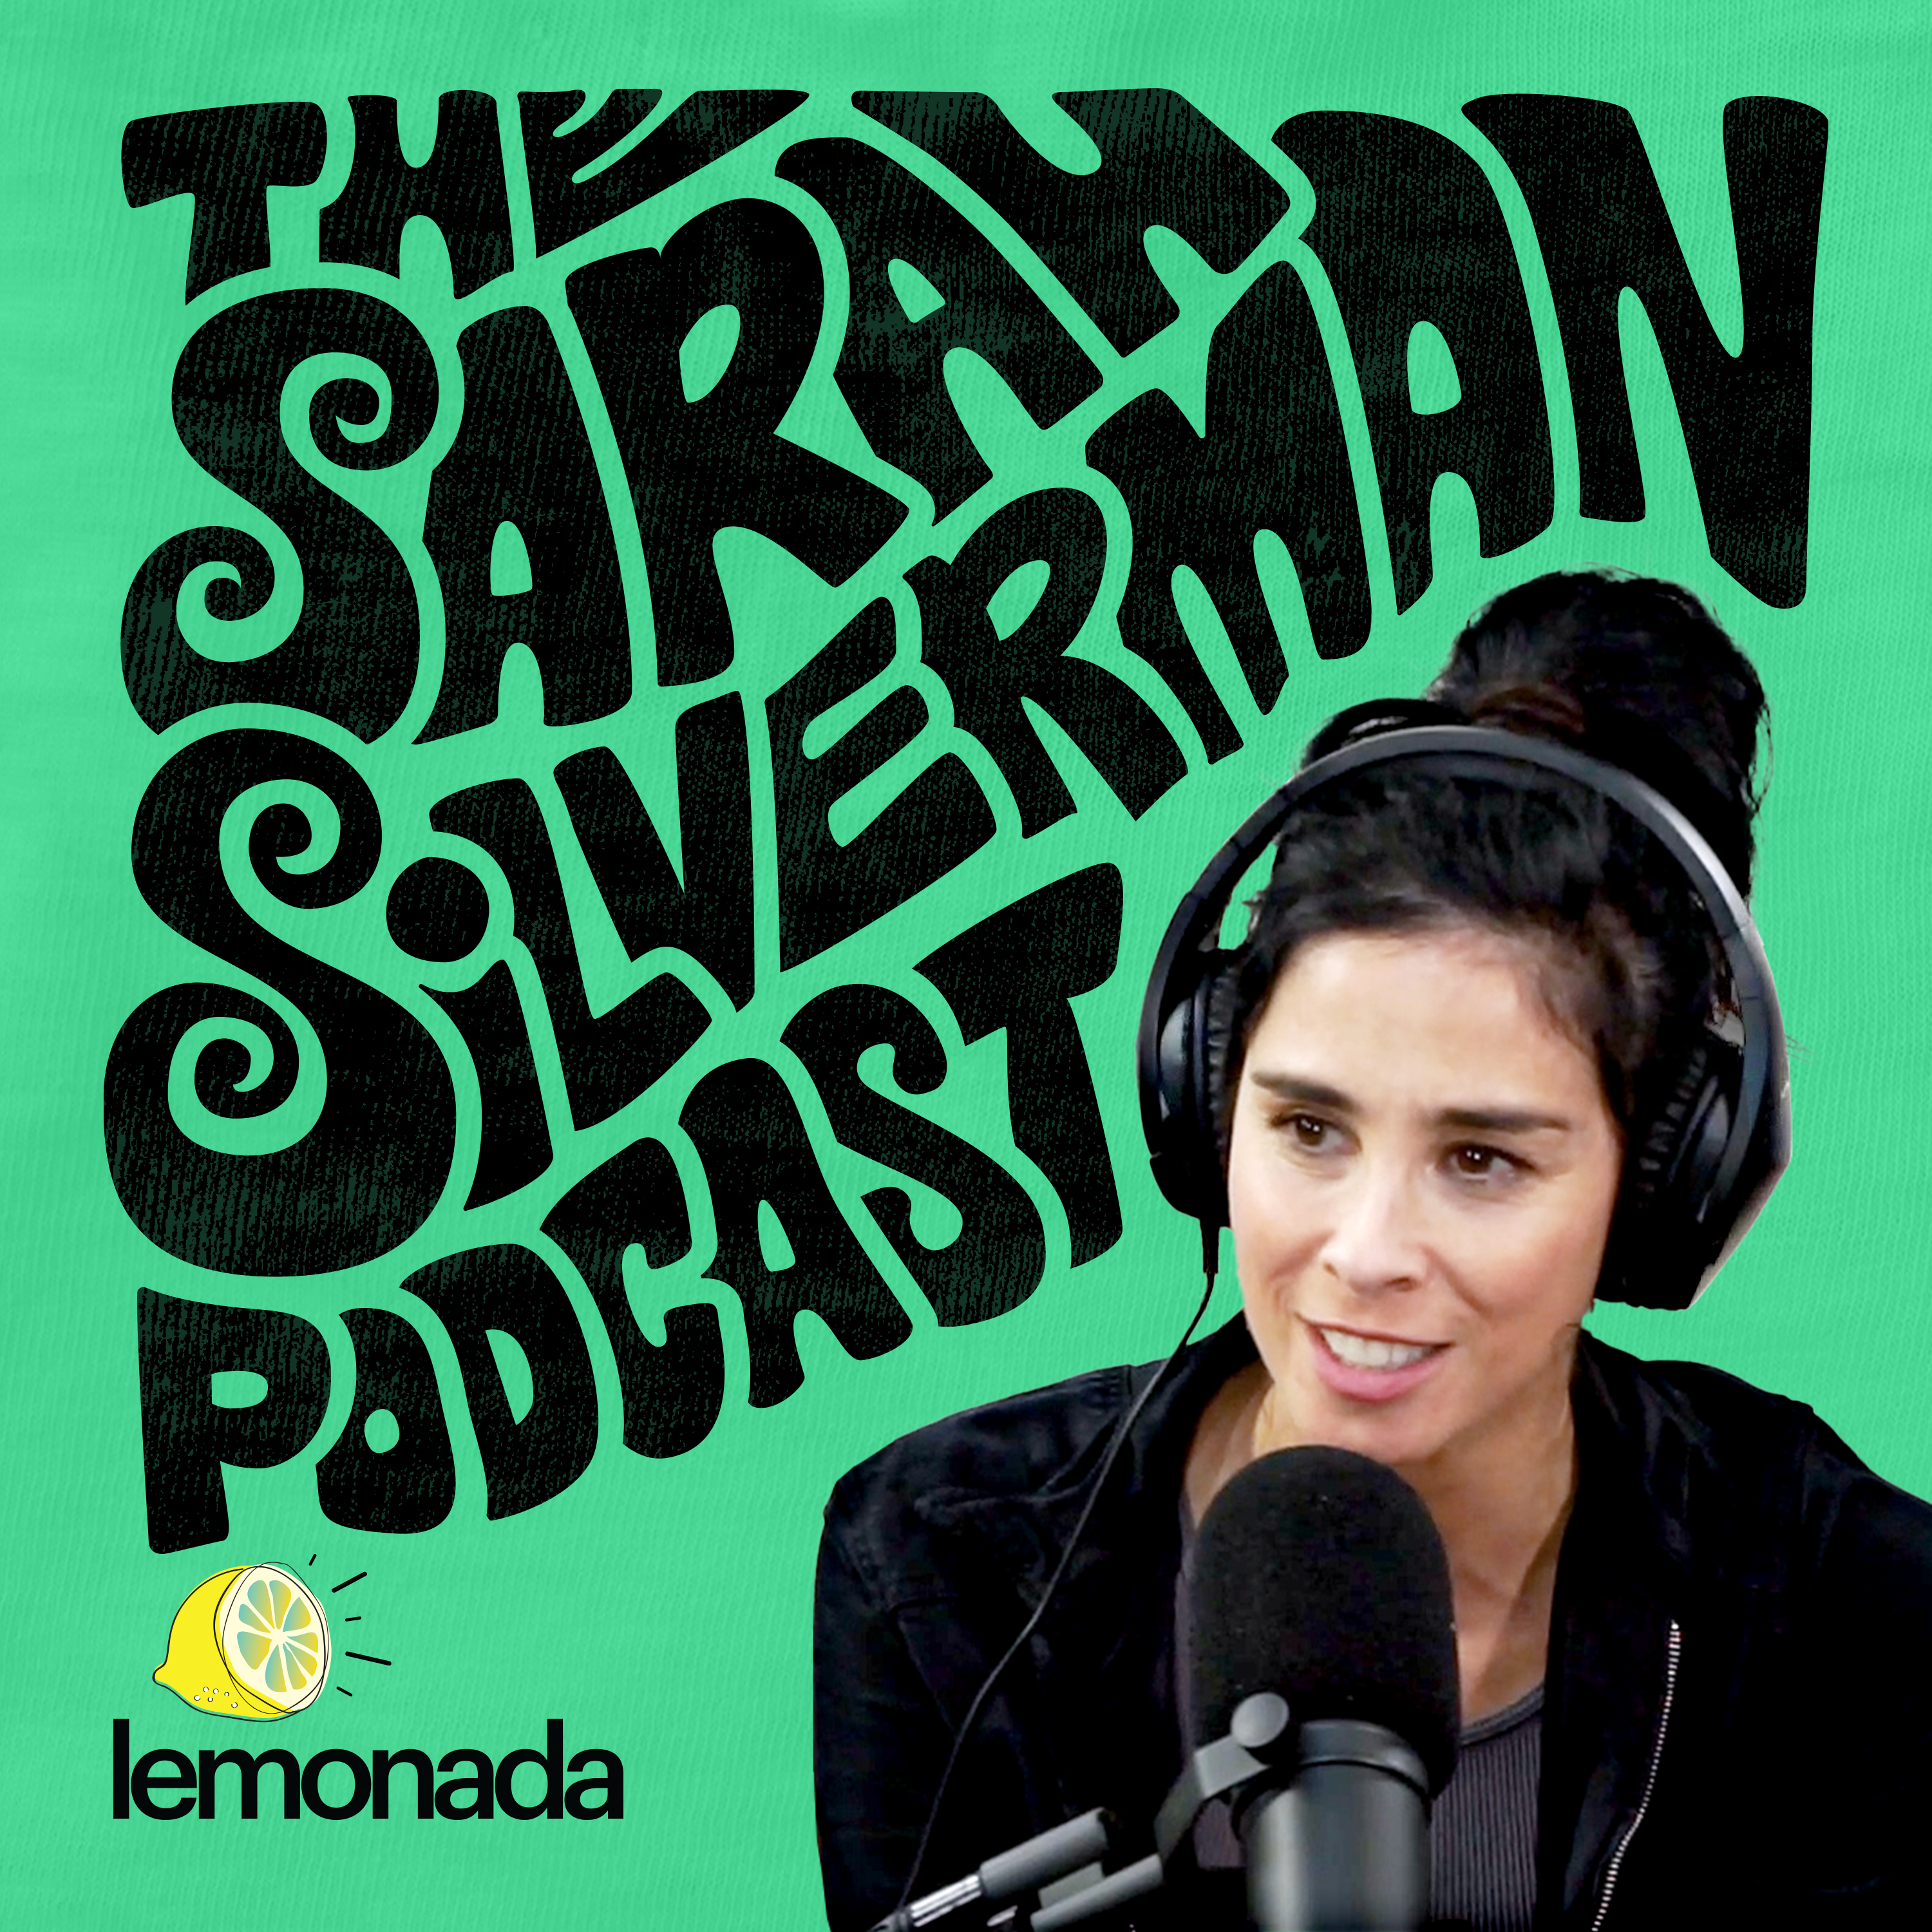 Listen Now: Fail Better with David Duchovny (featuring Sarah Silverman!)